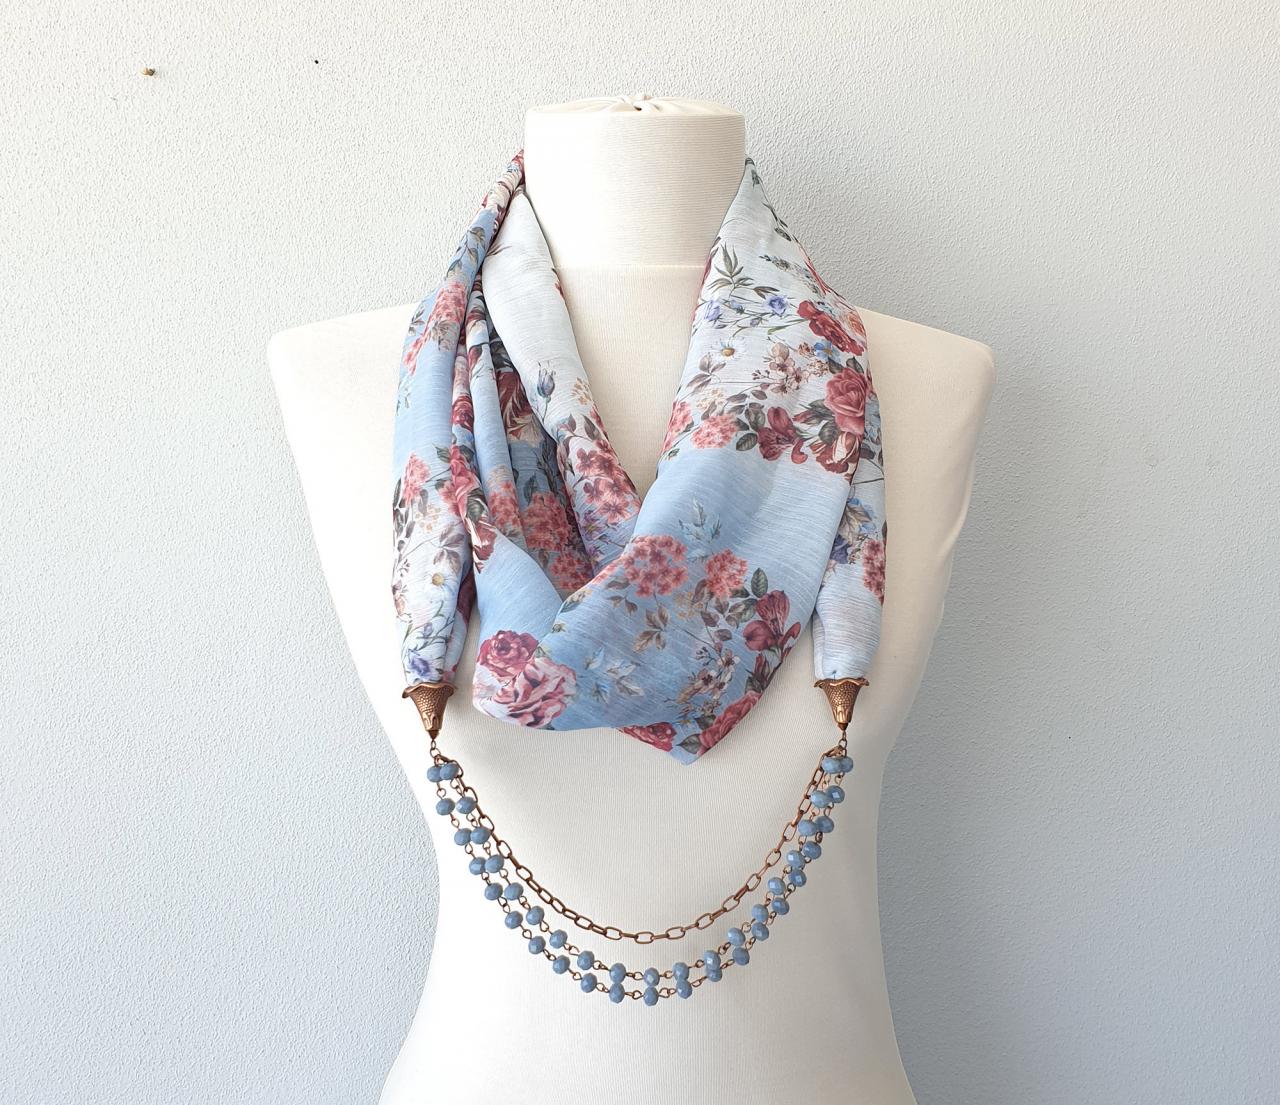 Beaded Scarf Necklace, Baby Blue Floral Infinity Scarf, Scarves For Women, Christmas Gift For Her Girlfriend, Gift For Mom,